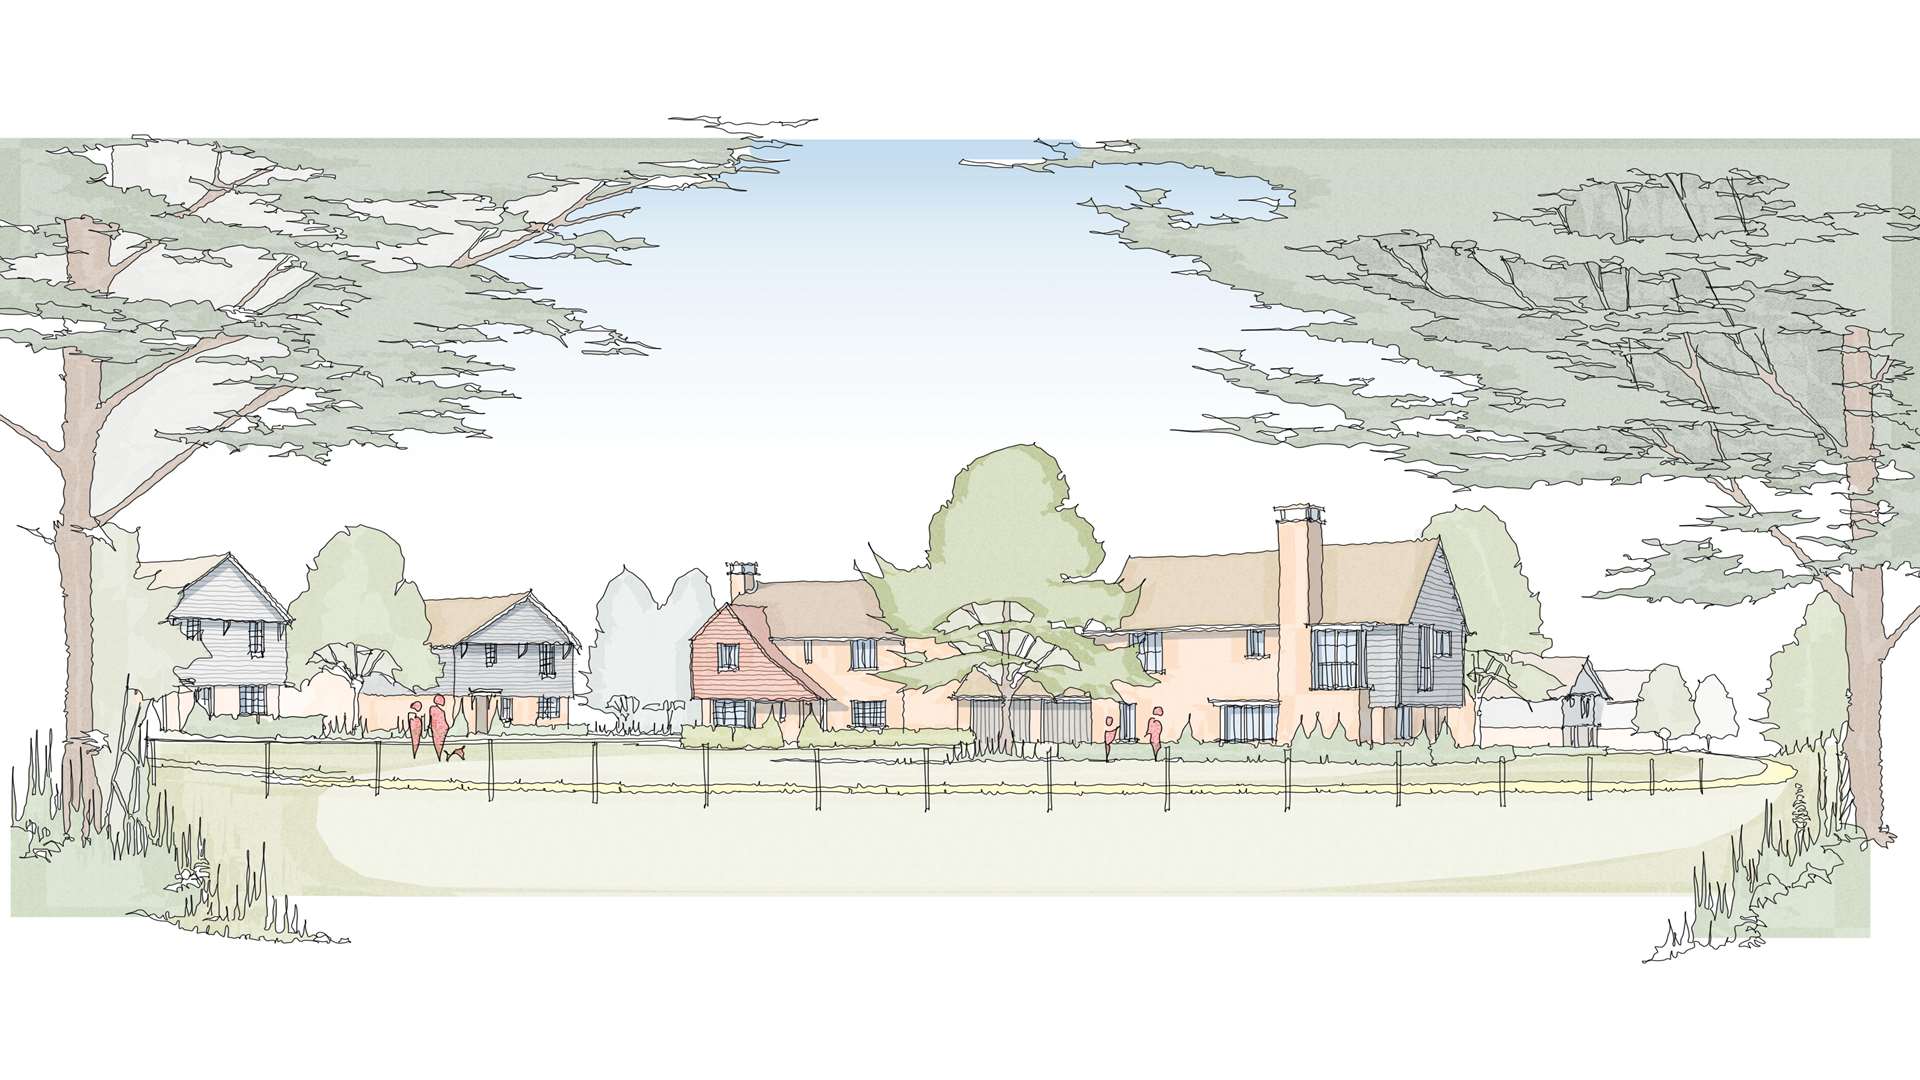 An artist's impression of the plans for 28 homes in Nonington